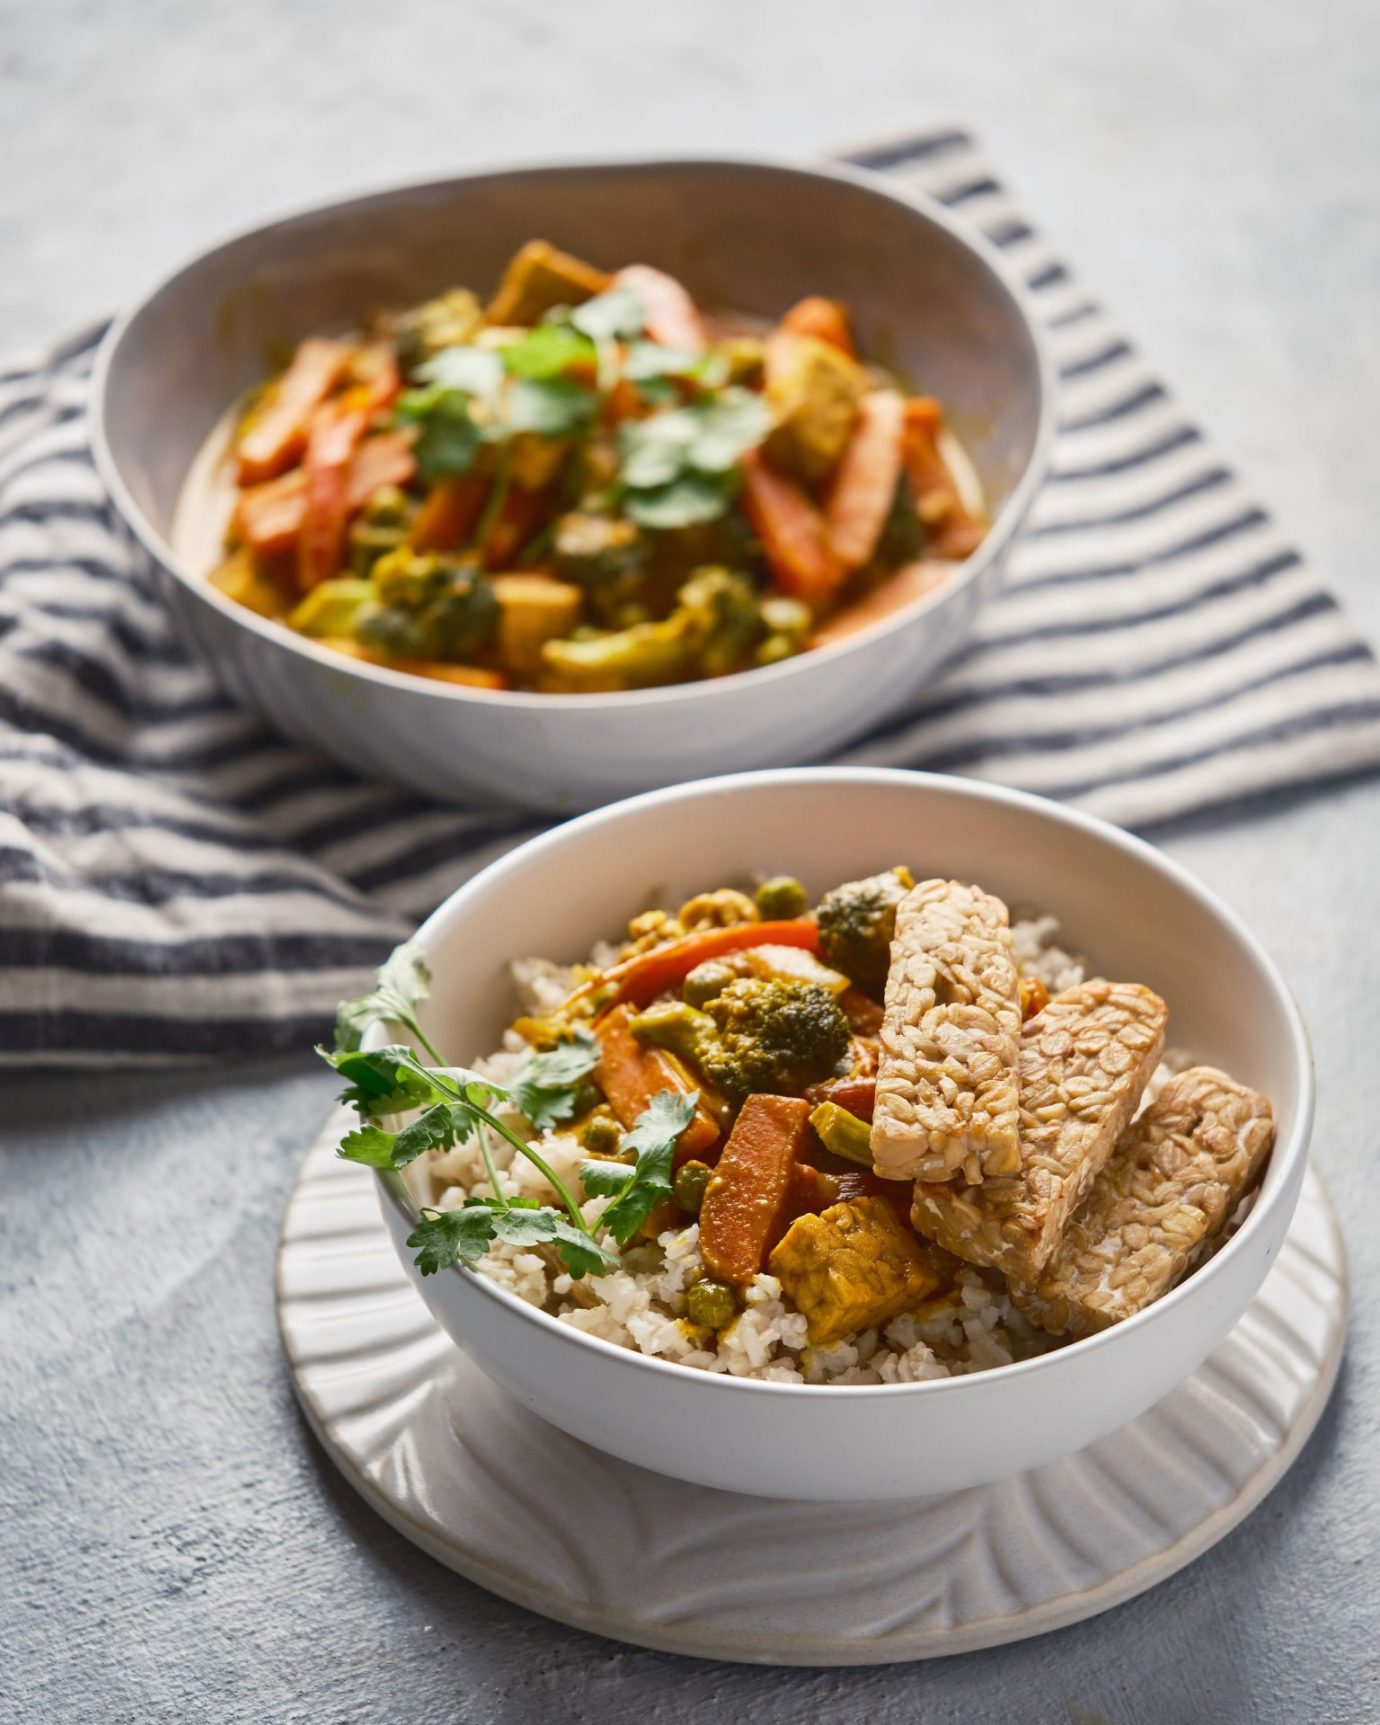 Bowl of yellow curry with vegetables, brown rice and tempeh